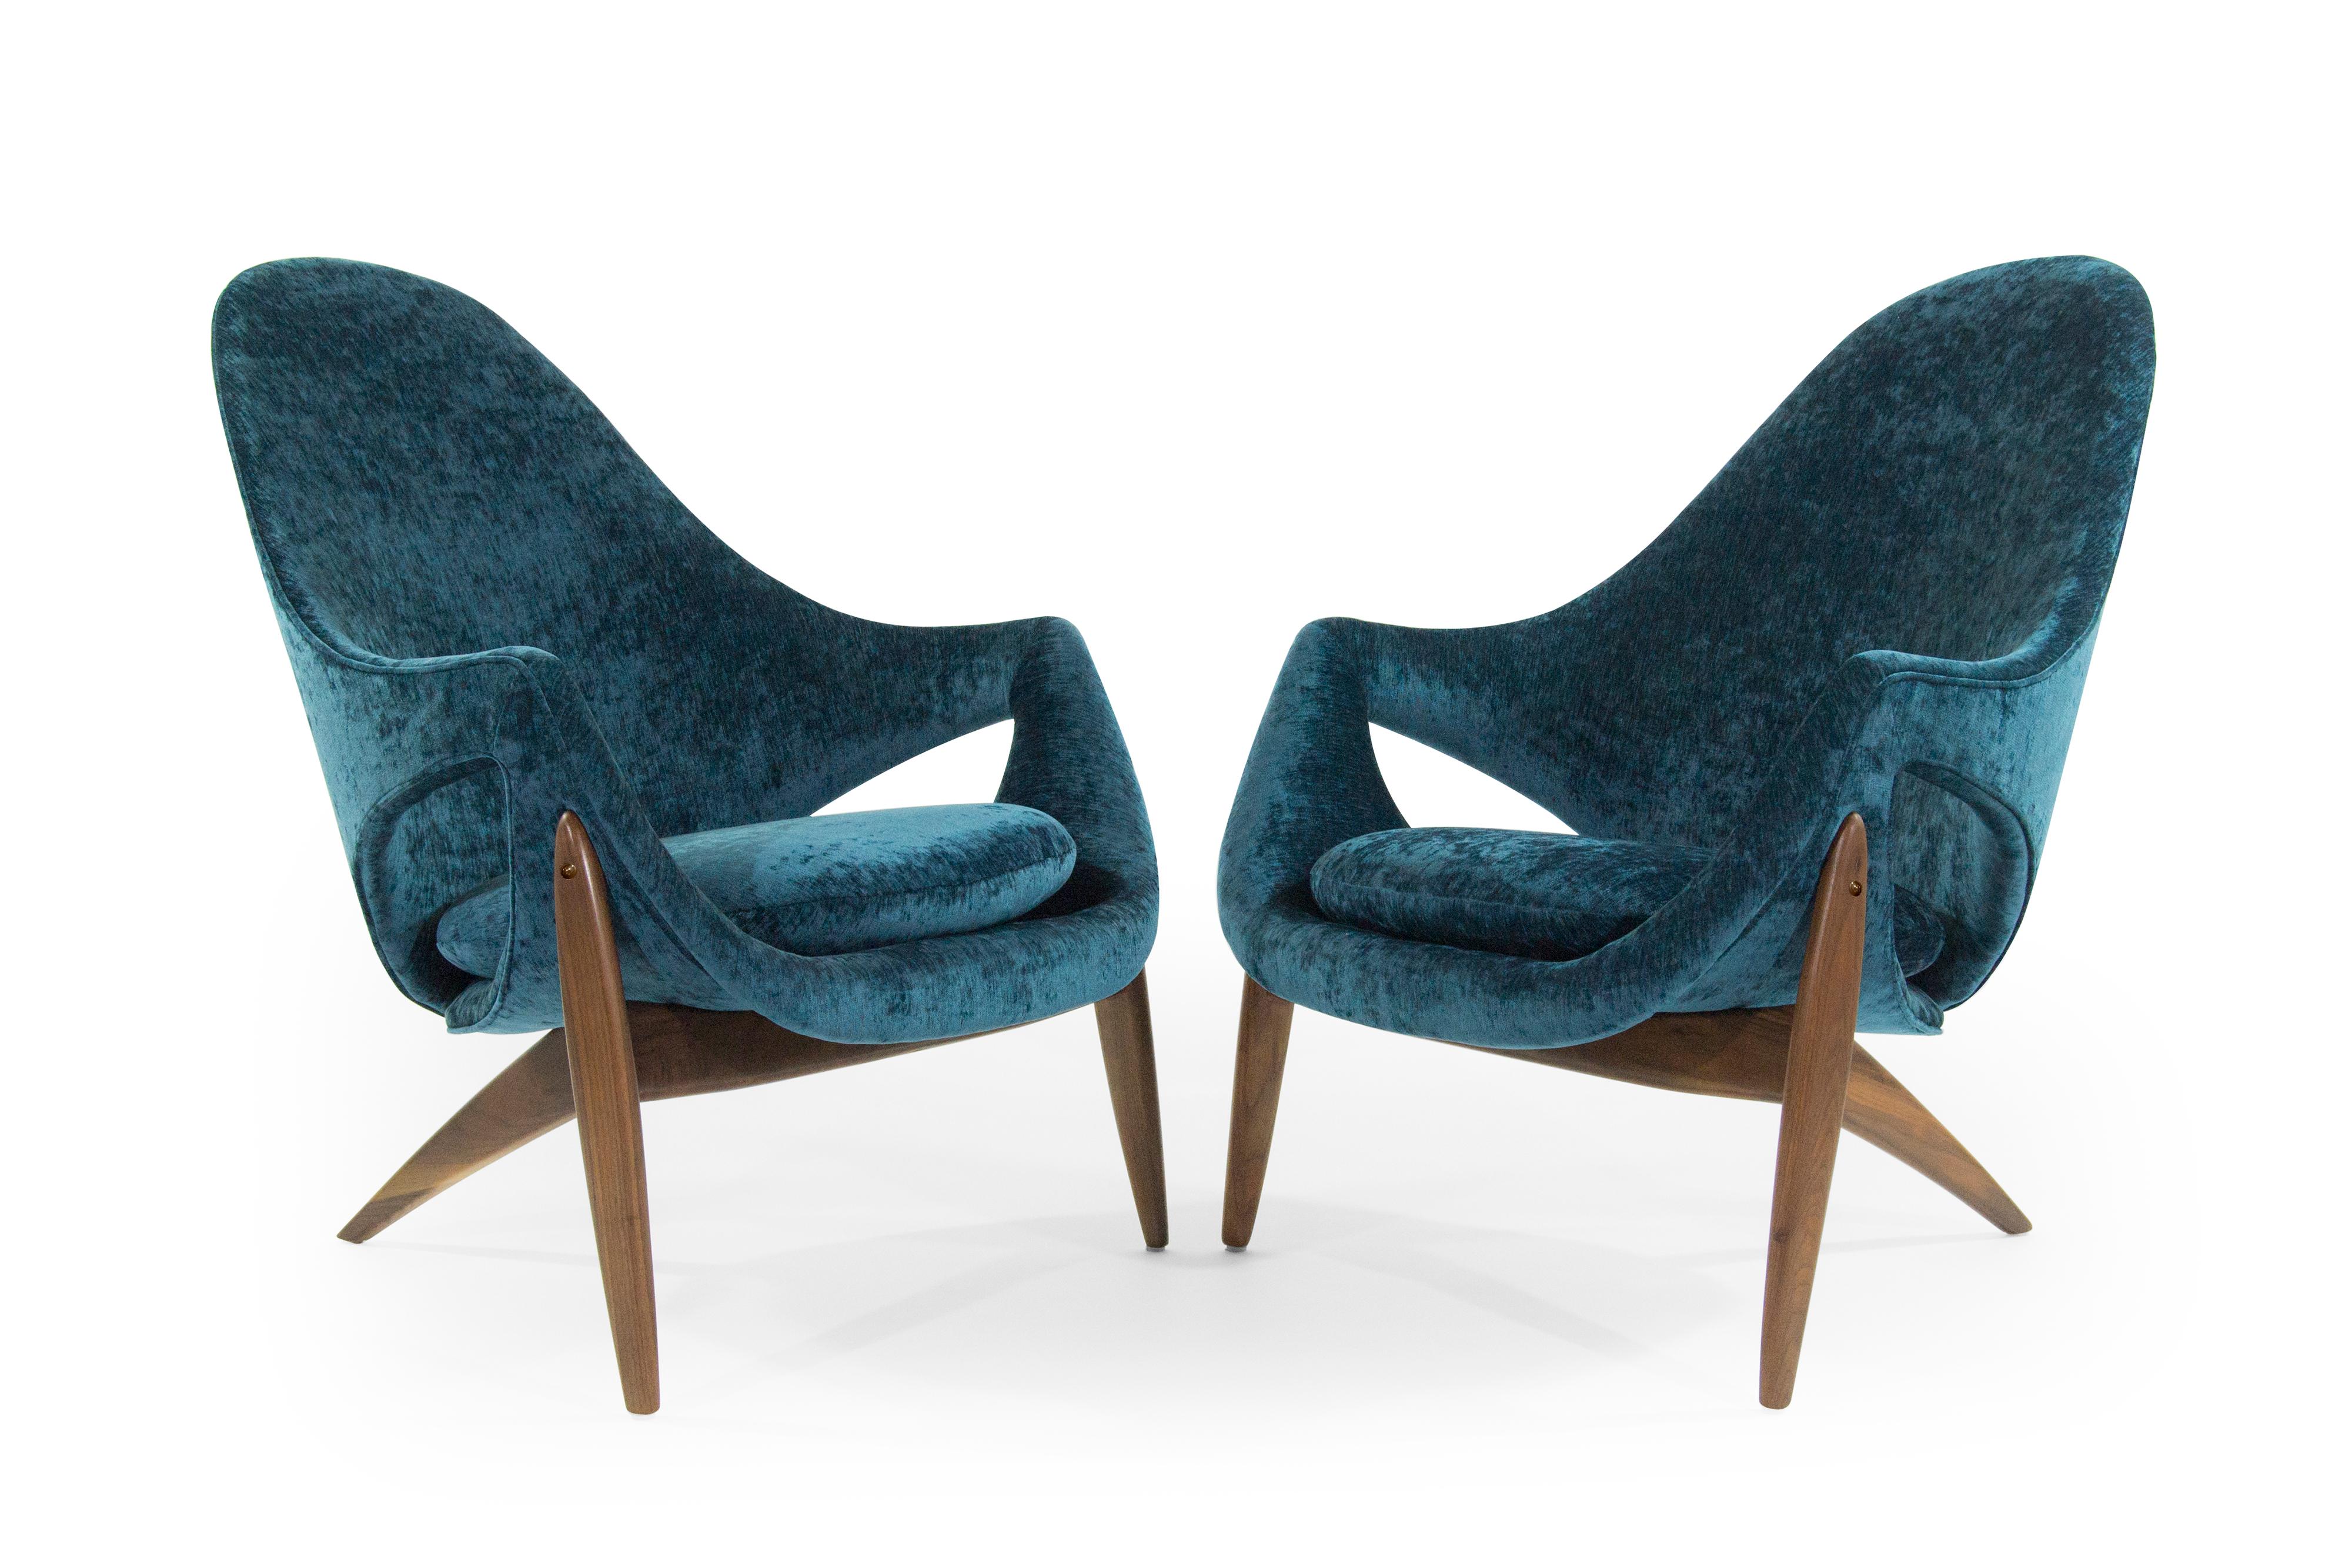 Rare set of chairs designed by Italy born furniture designer Luigi Tiengo and produced by the Canadian manufacturer Cimon in 1963. Sculptural shape featuring three-legged fully restored walnut bases, newly upholstered in blue chenille. Striking from